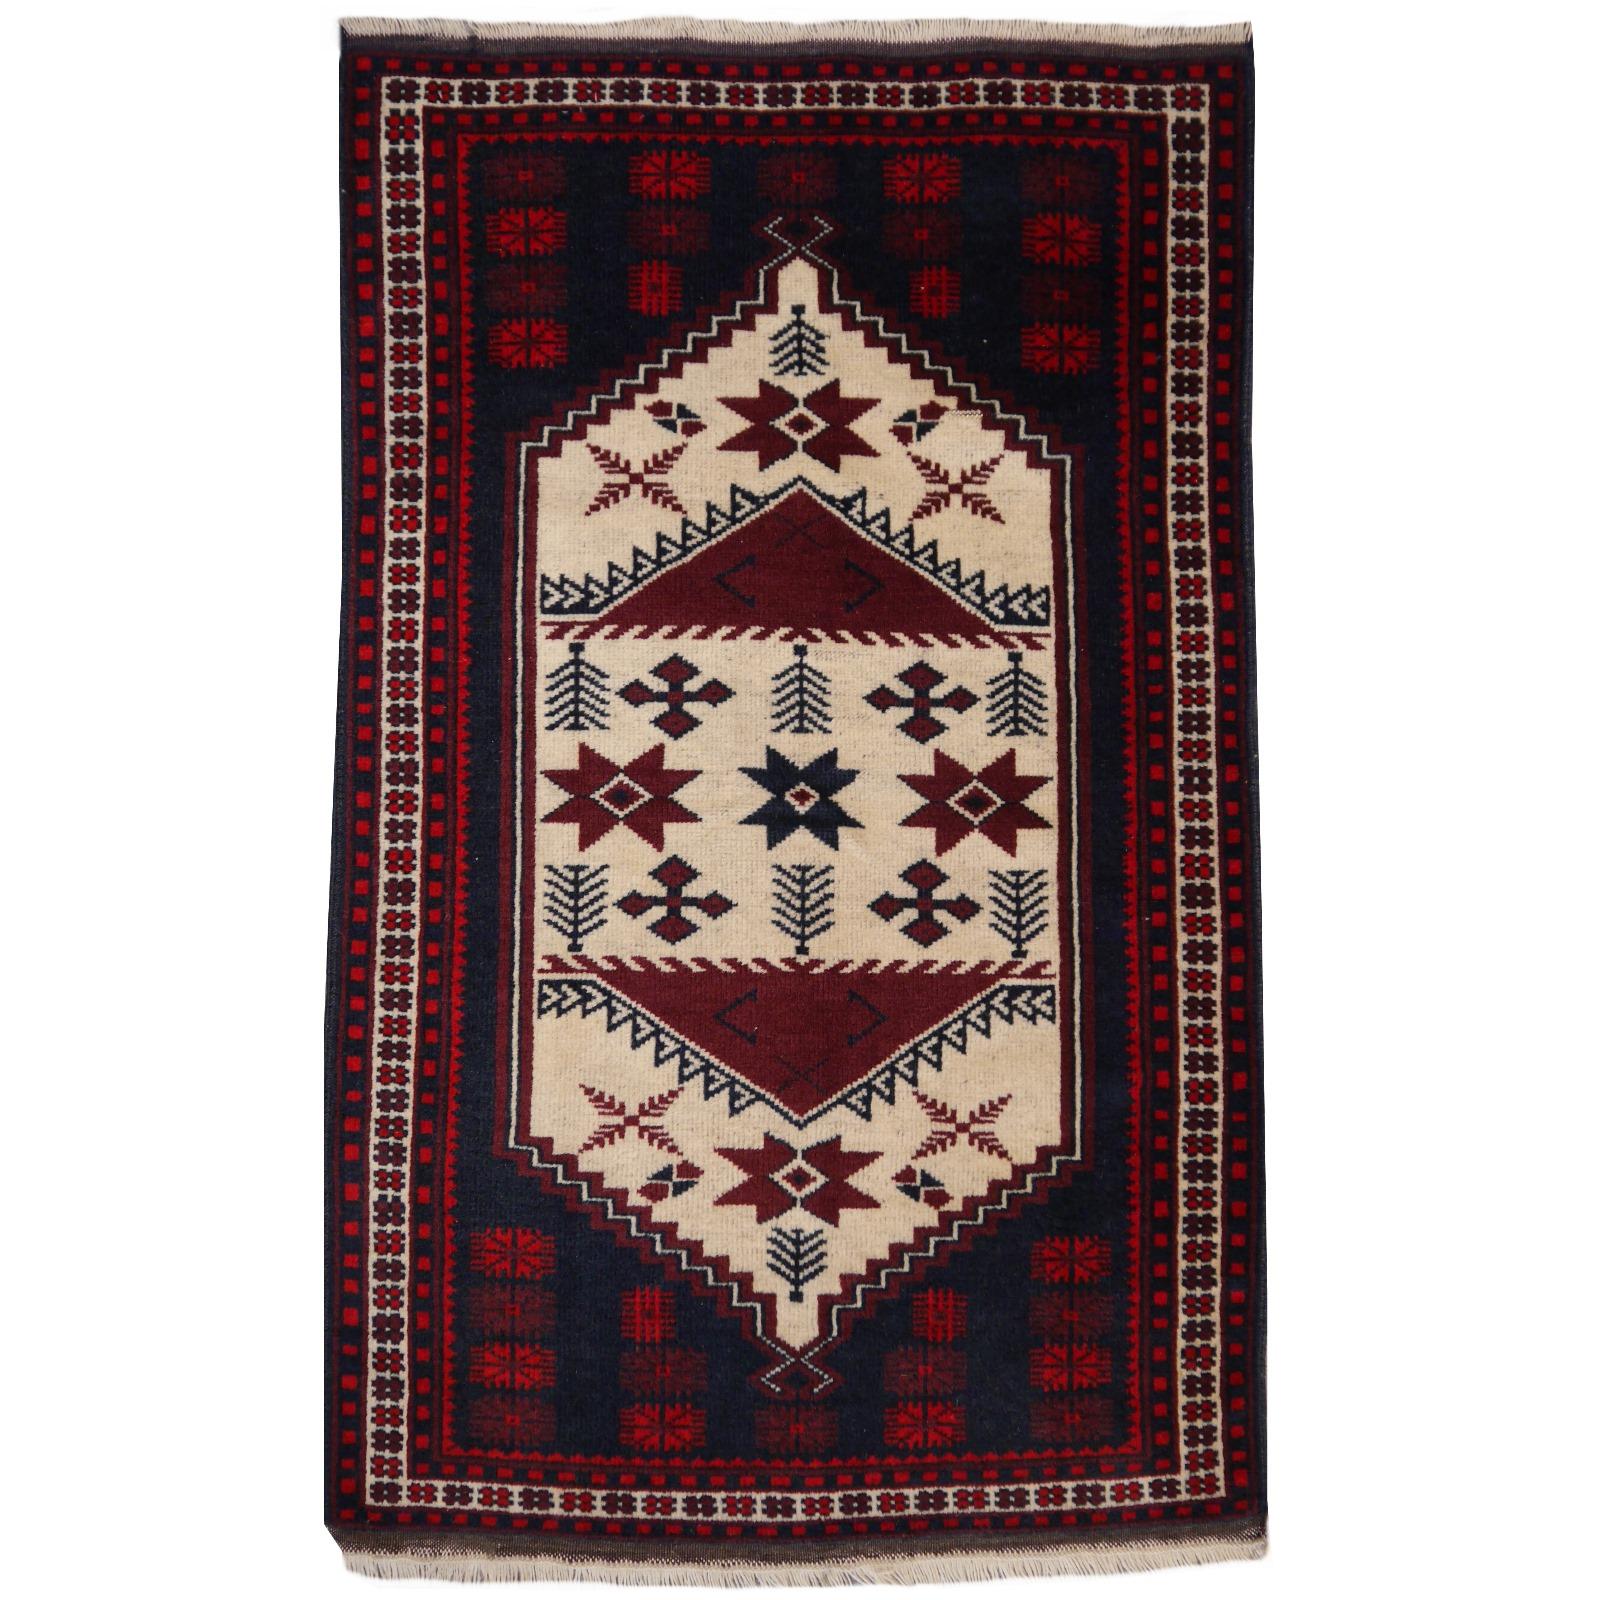 Vintage Turkish Rug Slightly Worn Distressed Industrial Look Hand-Knotted For Sale